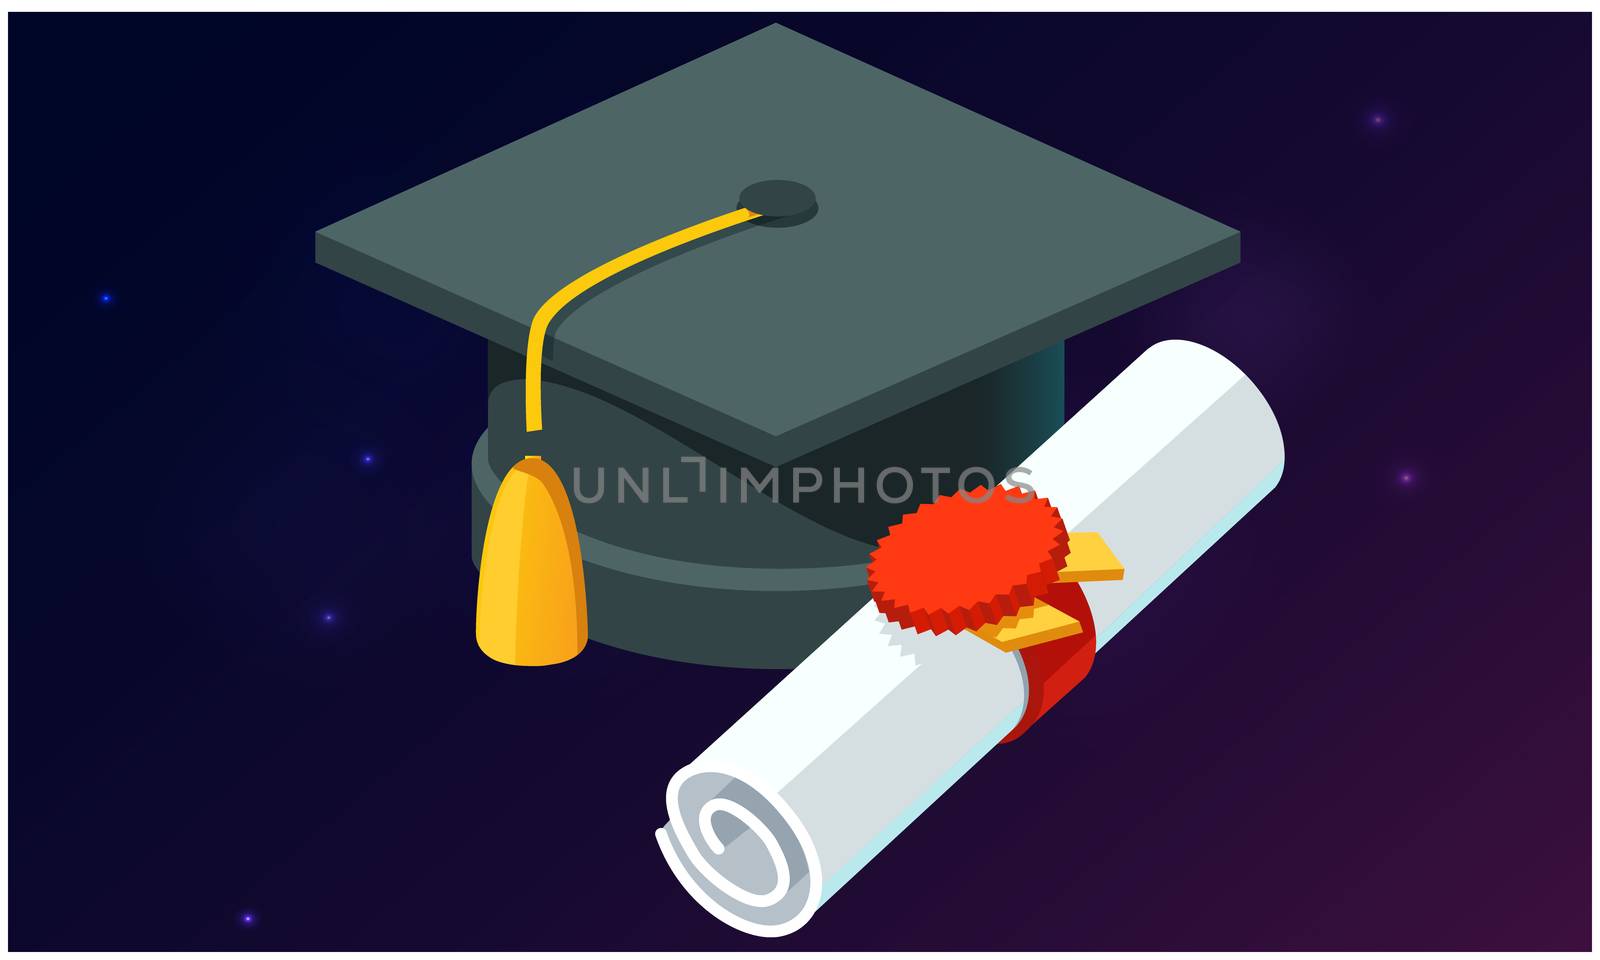 mock up illustration of graduation cap and certificate on abstract backgrounds